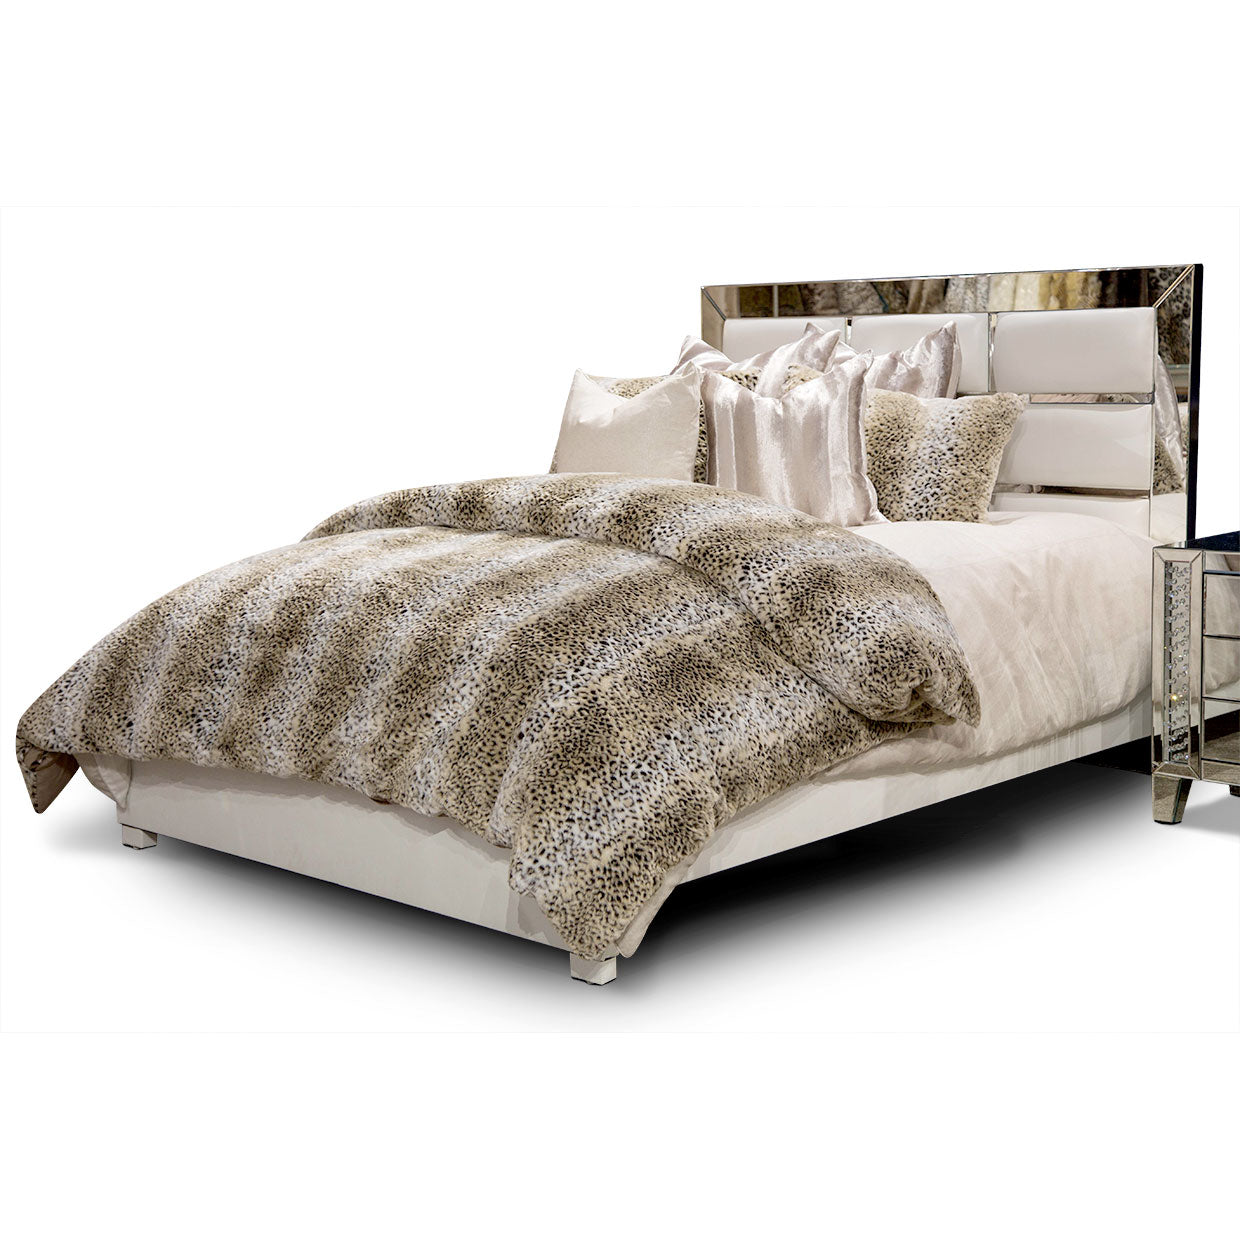 MONTREAL Queen Upholstered Bed - Dreamart Gallery